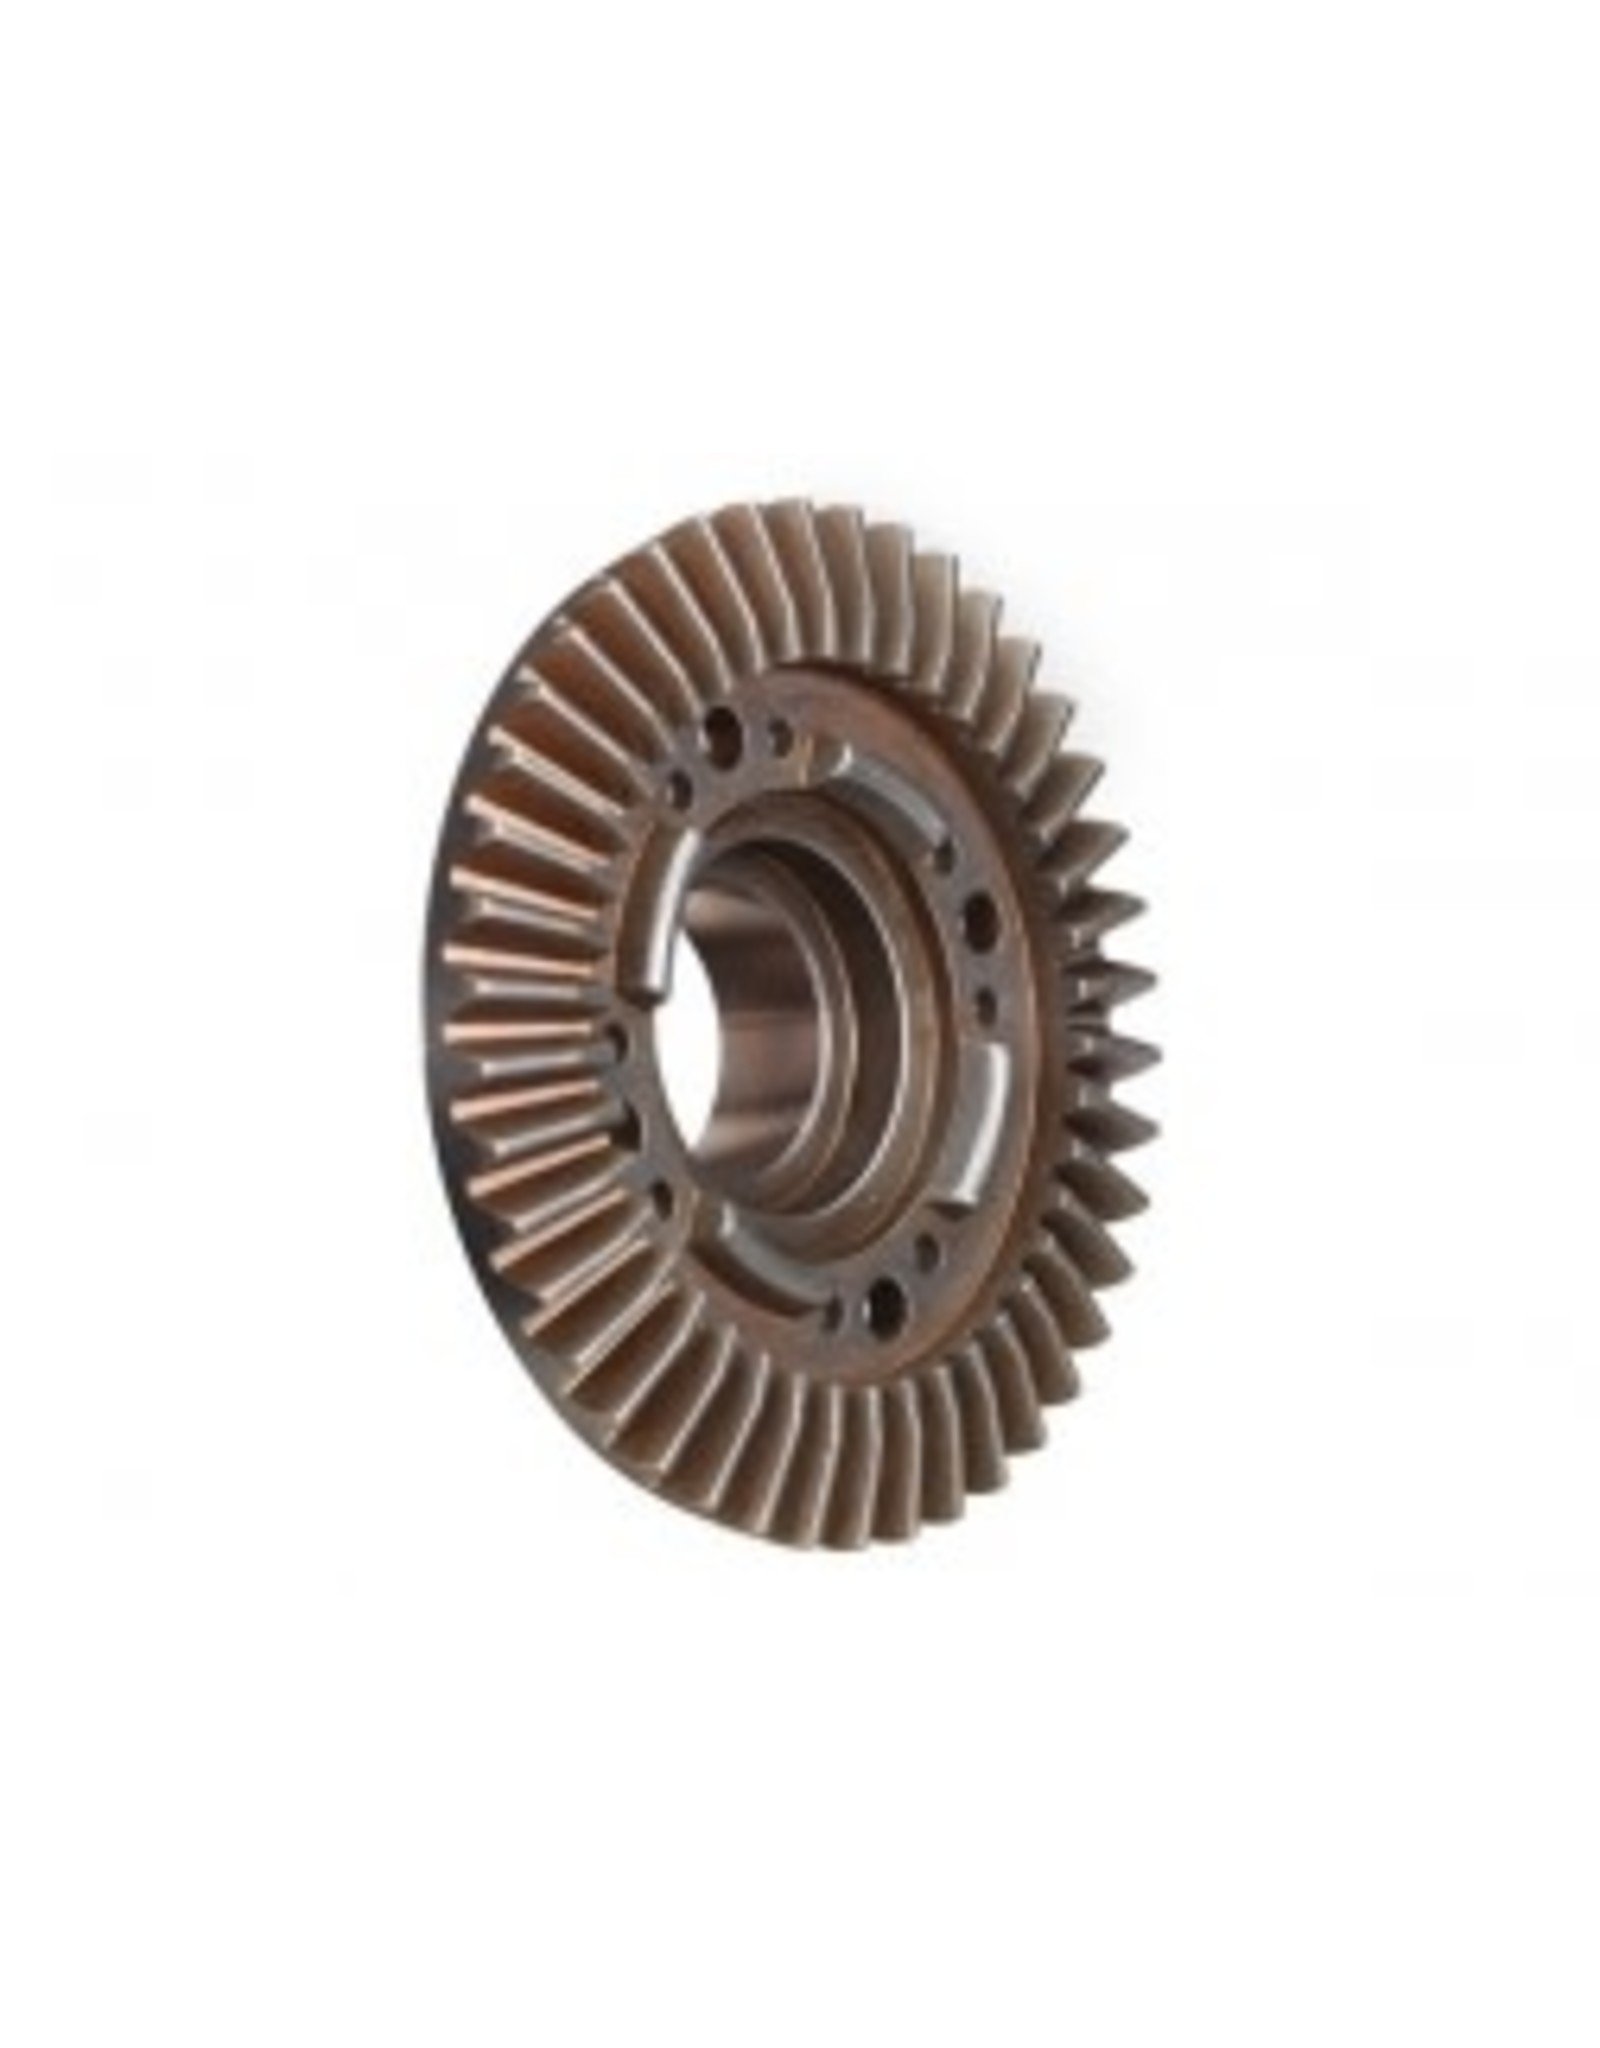 Traxxas Ring gear, differential, 35-tooth (heavy duty) (use with #7790, #7791 11-tooth differential pinion gears)